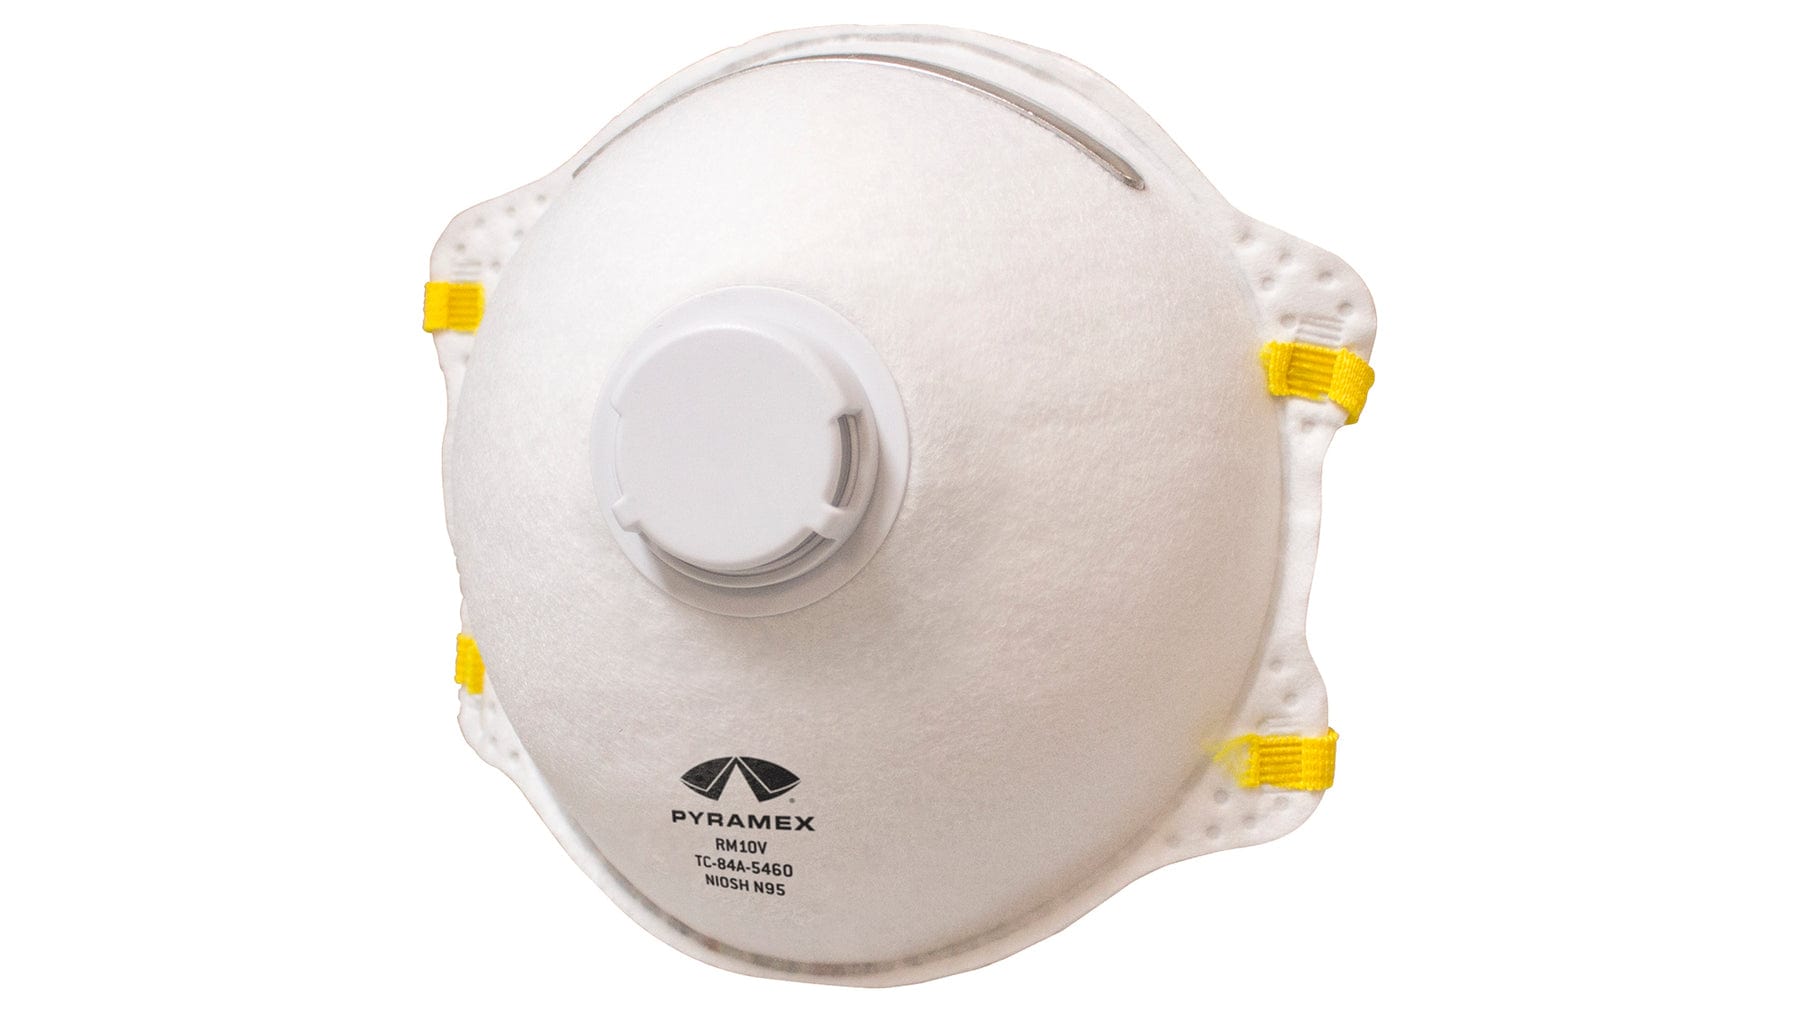 Pyramex Disposable N95 Respirator with Valve - Box of 10